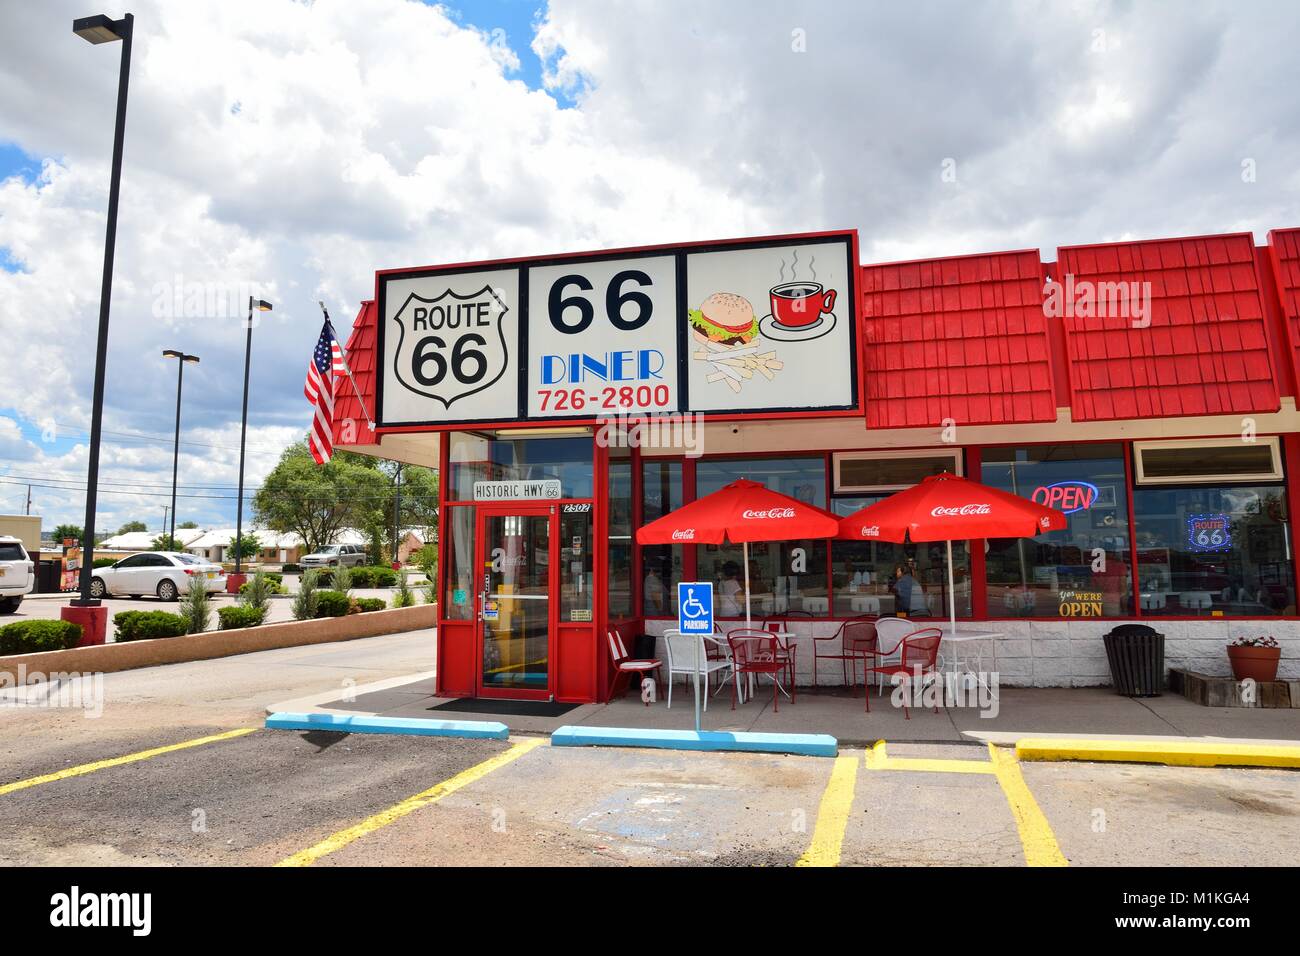 GALLUP, NEW MEXICO - JULY 22: Legendary Route 66 Diner is a classic on historic highway Route 66 on July 22, 2017 in Gallup, New Mexico Stock Photo